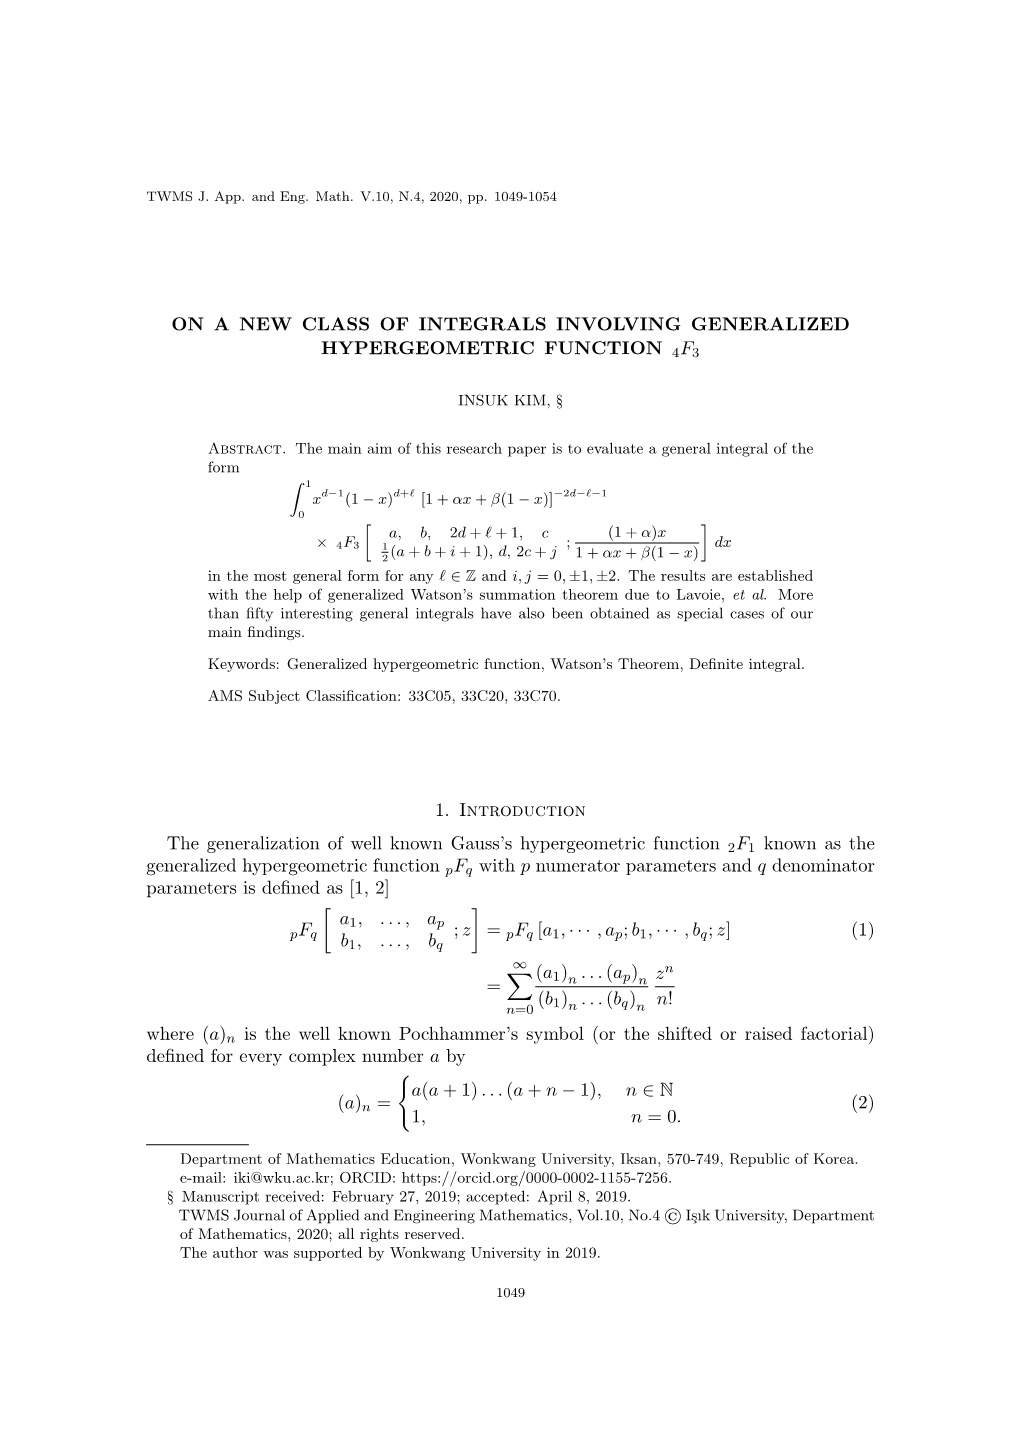 On a New Class of Integrals Involving Generalized Hypergeometric Function 4F3